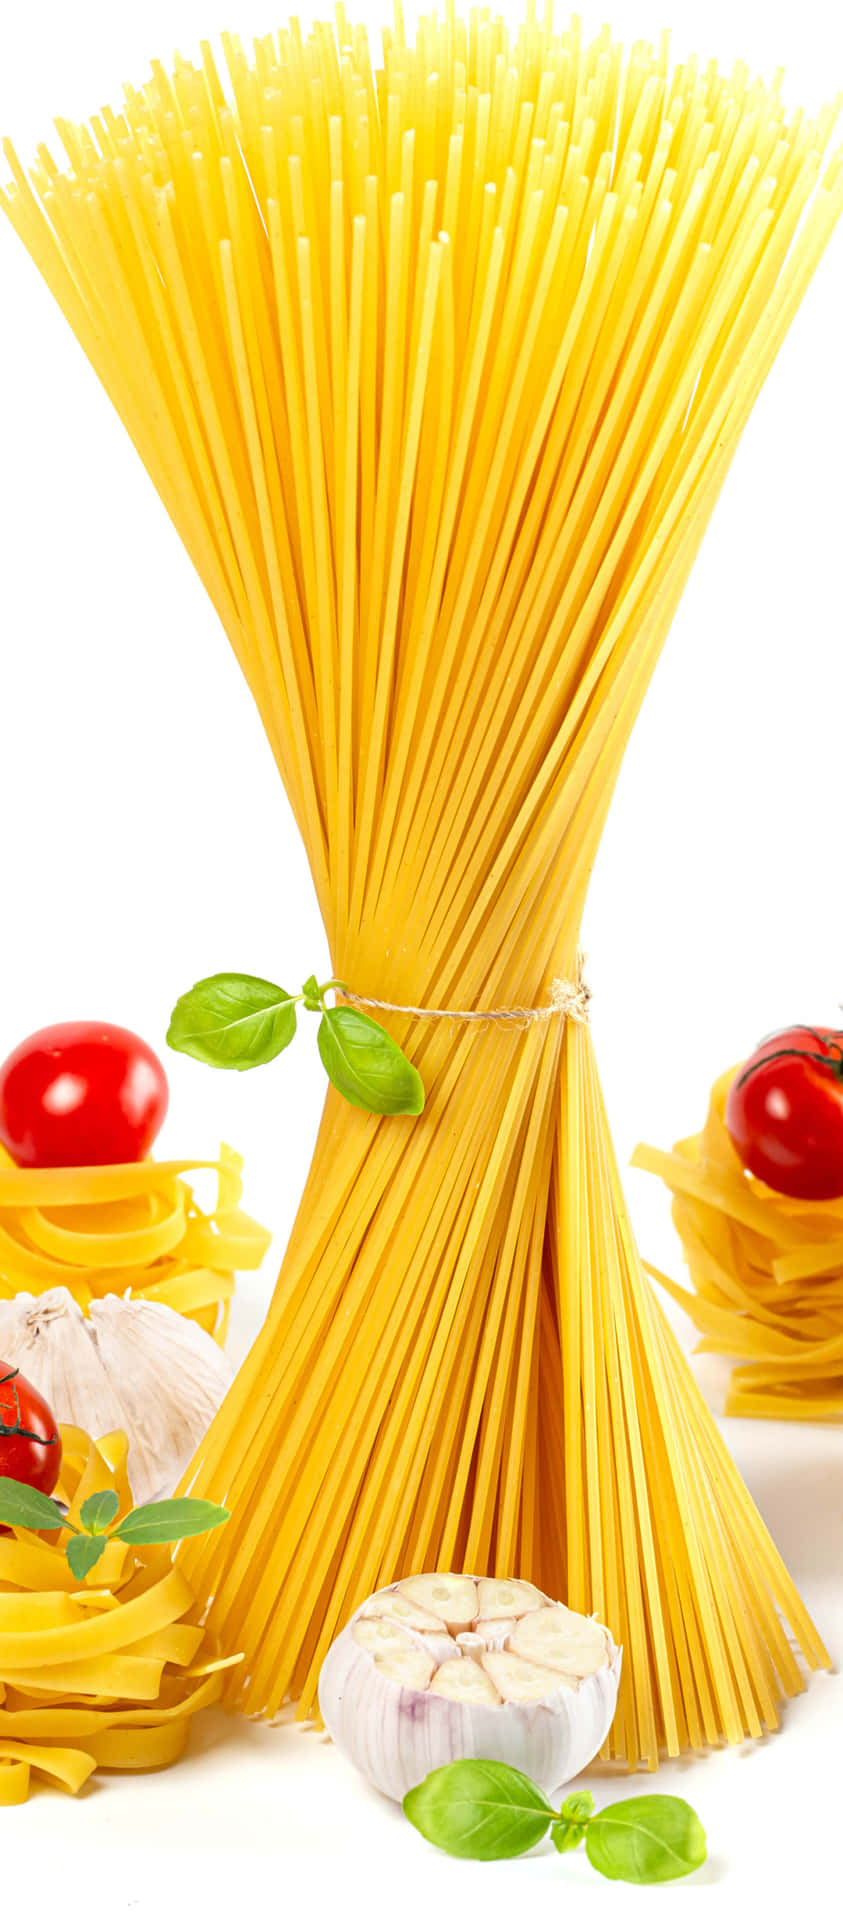 Aromatic Delight - A Compilation Of Exquisite Pasta